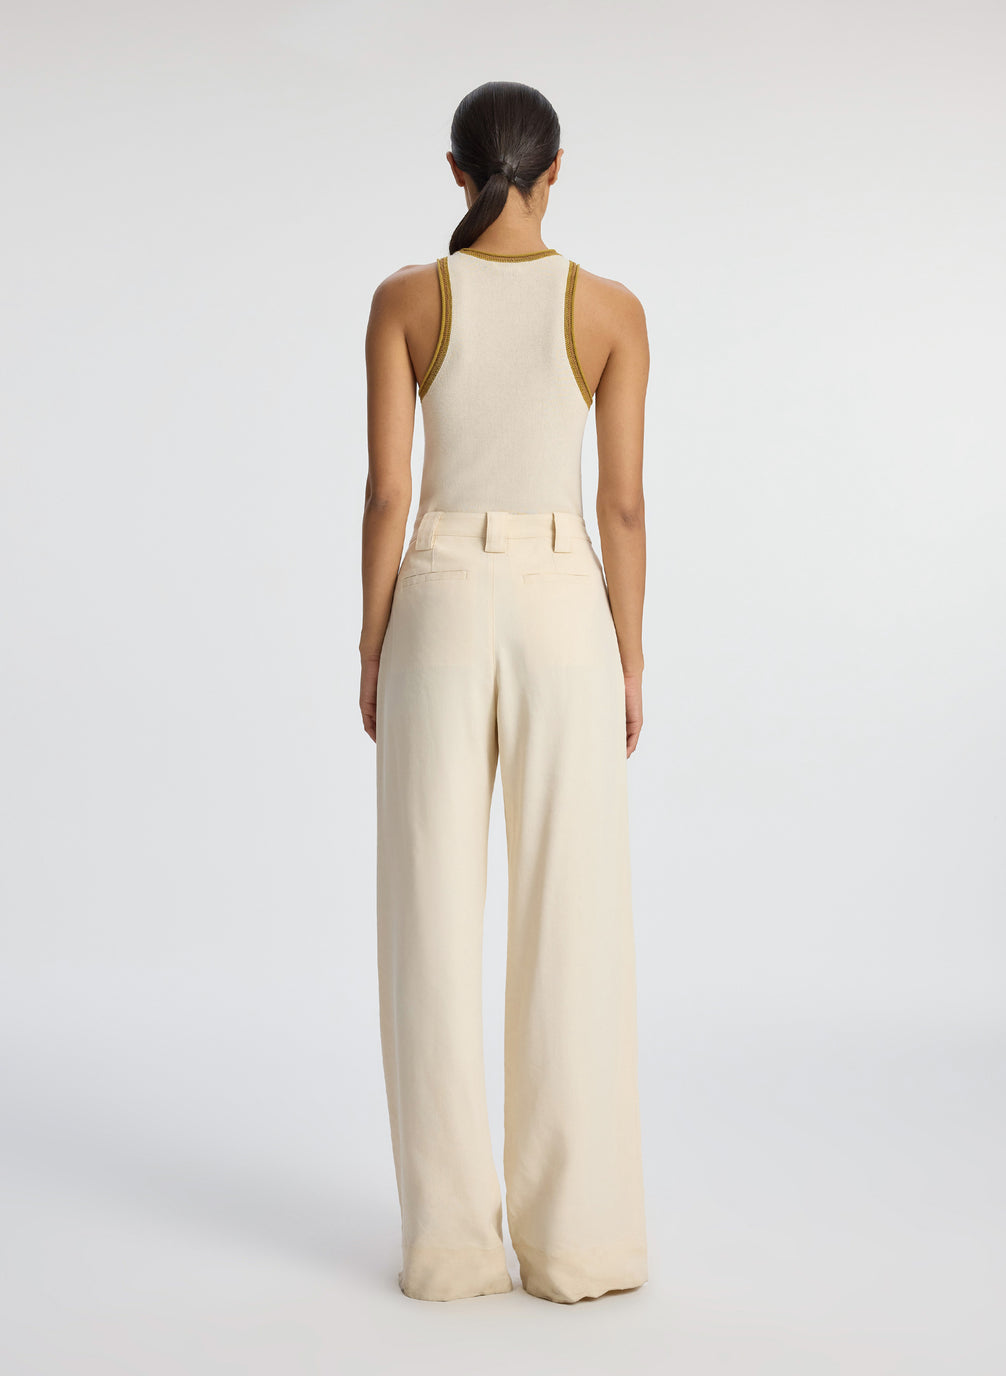 back view of woman wearing cream contrast trim tank and beige wide leg pant